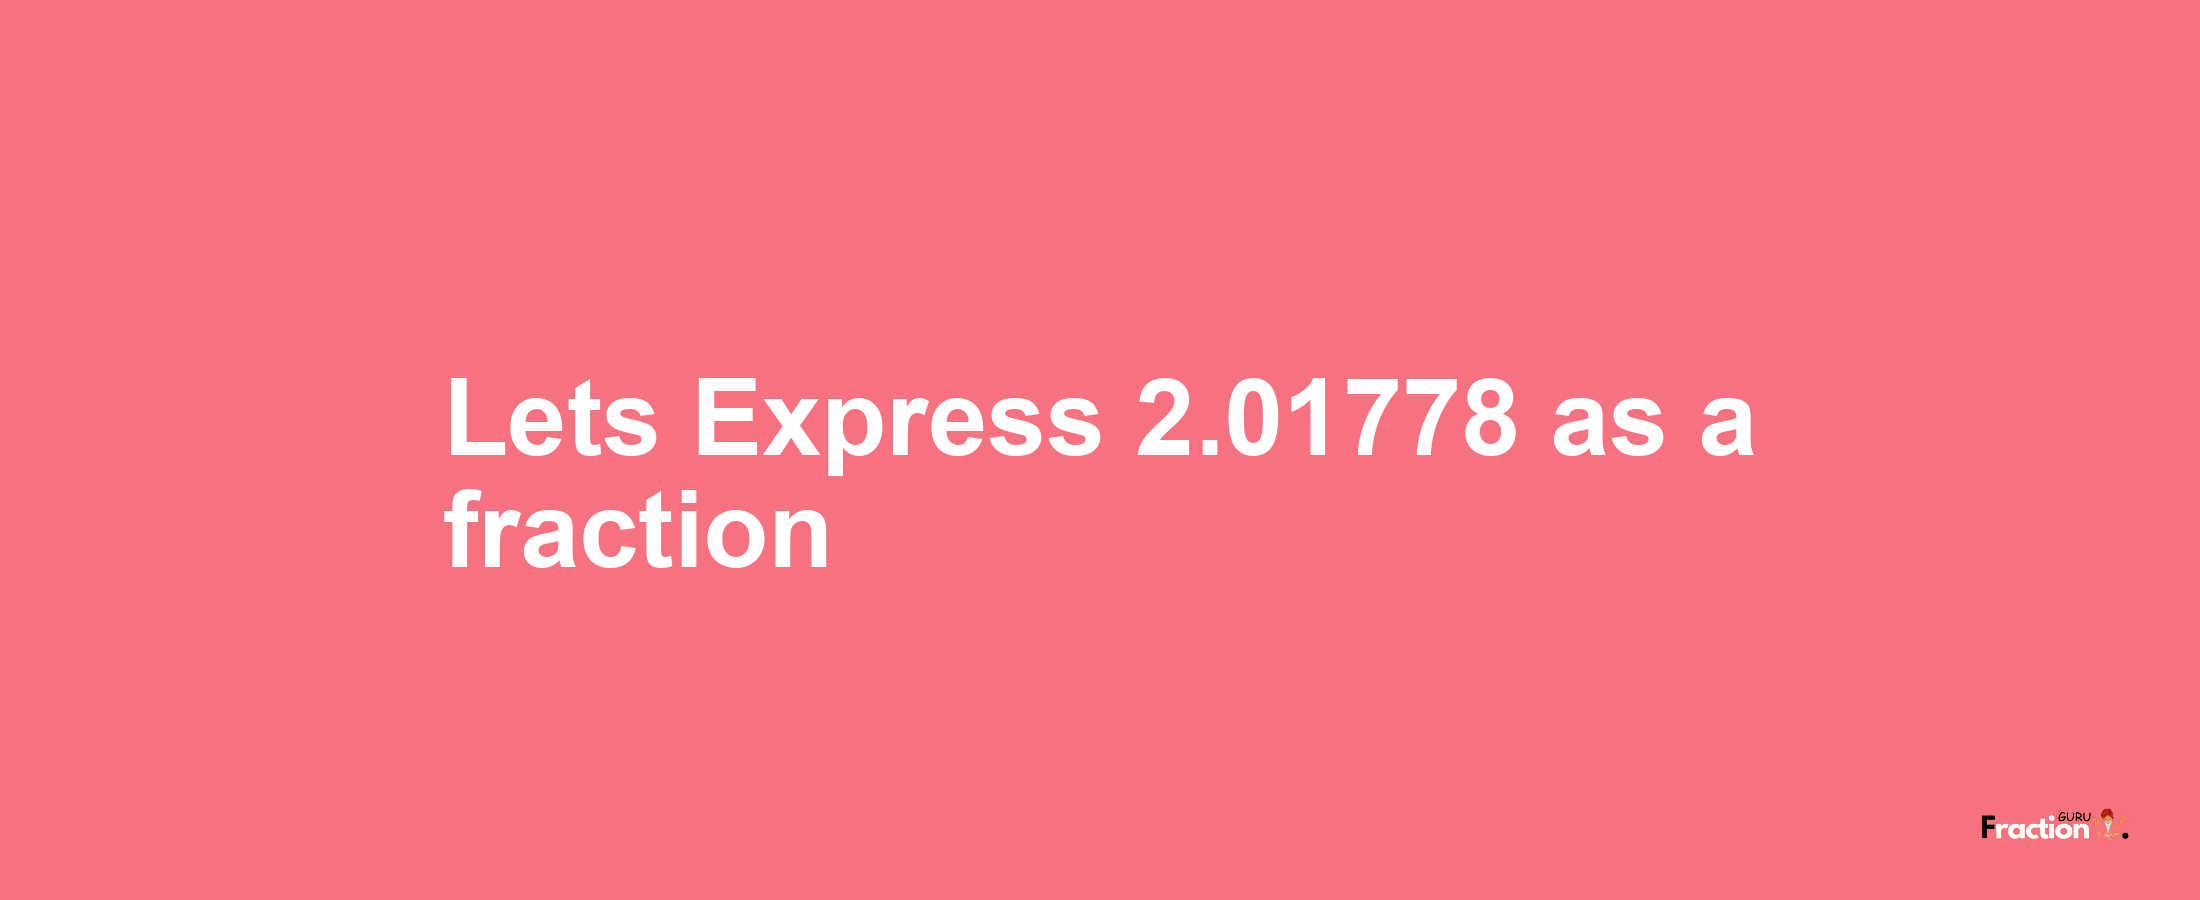 Lets Express 2.01778 as afraction